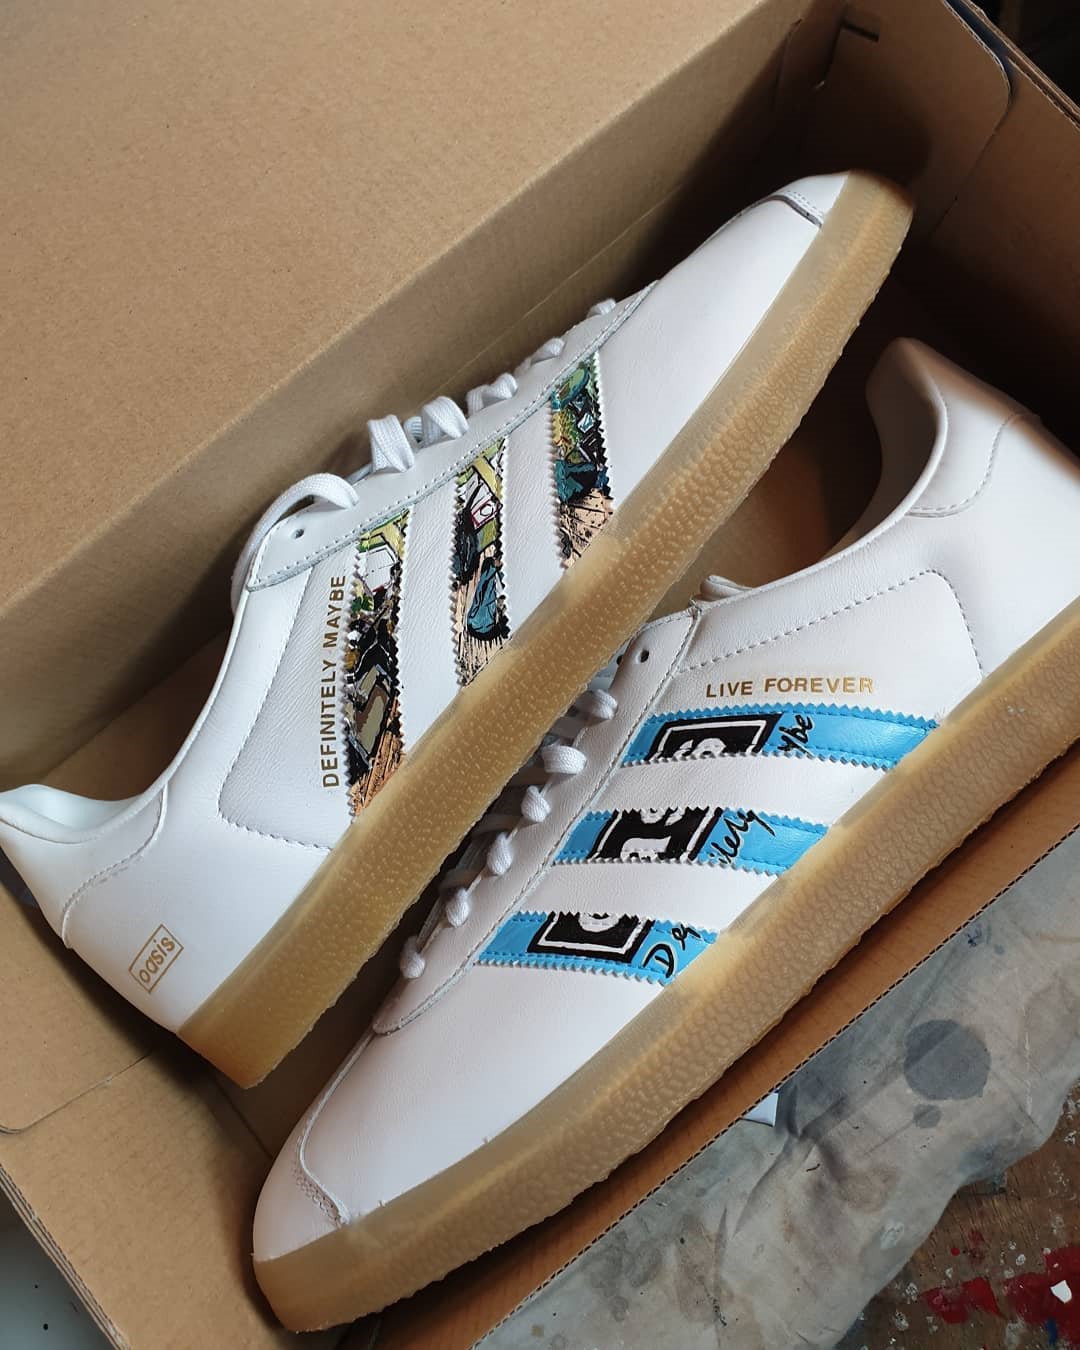 cafetería Interprete Privilegiado Latest Oasis News on Twitter: "Check out these custom made Oasis Adidas  trainers designed by Gareth Cash, have a look at his Instagram profile for  more Mancunian inspired designs. 📷 garethcash https://t.co/W3A9flQx9N" /